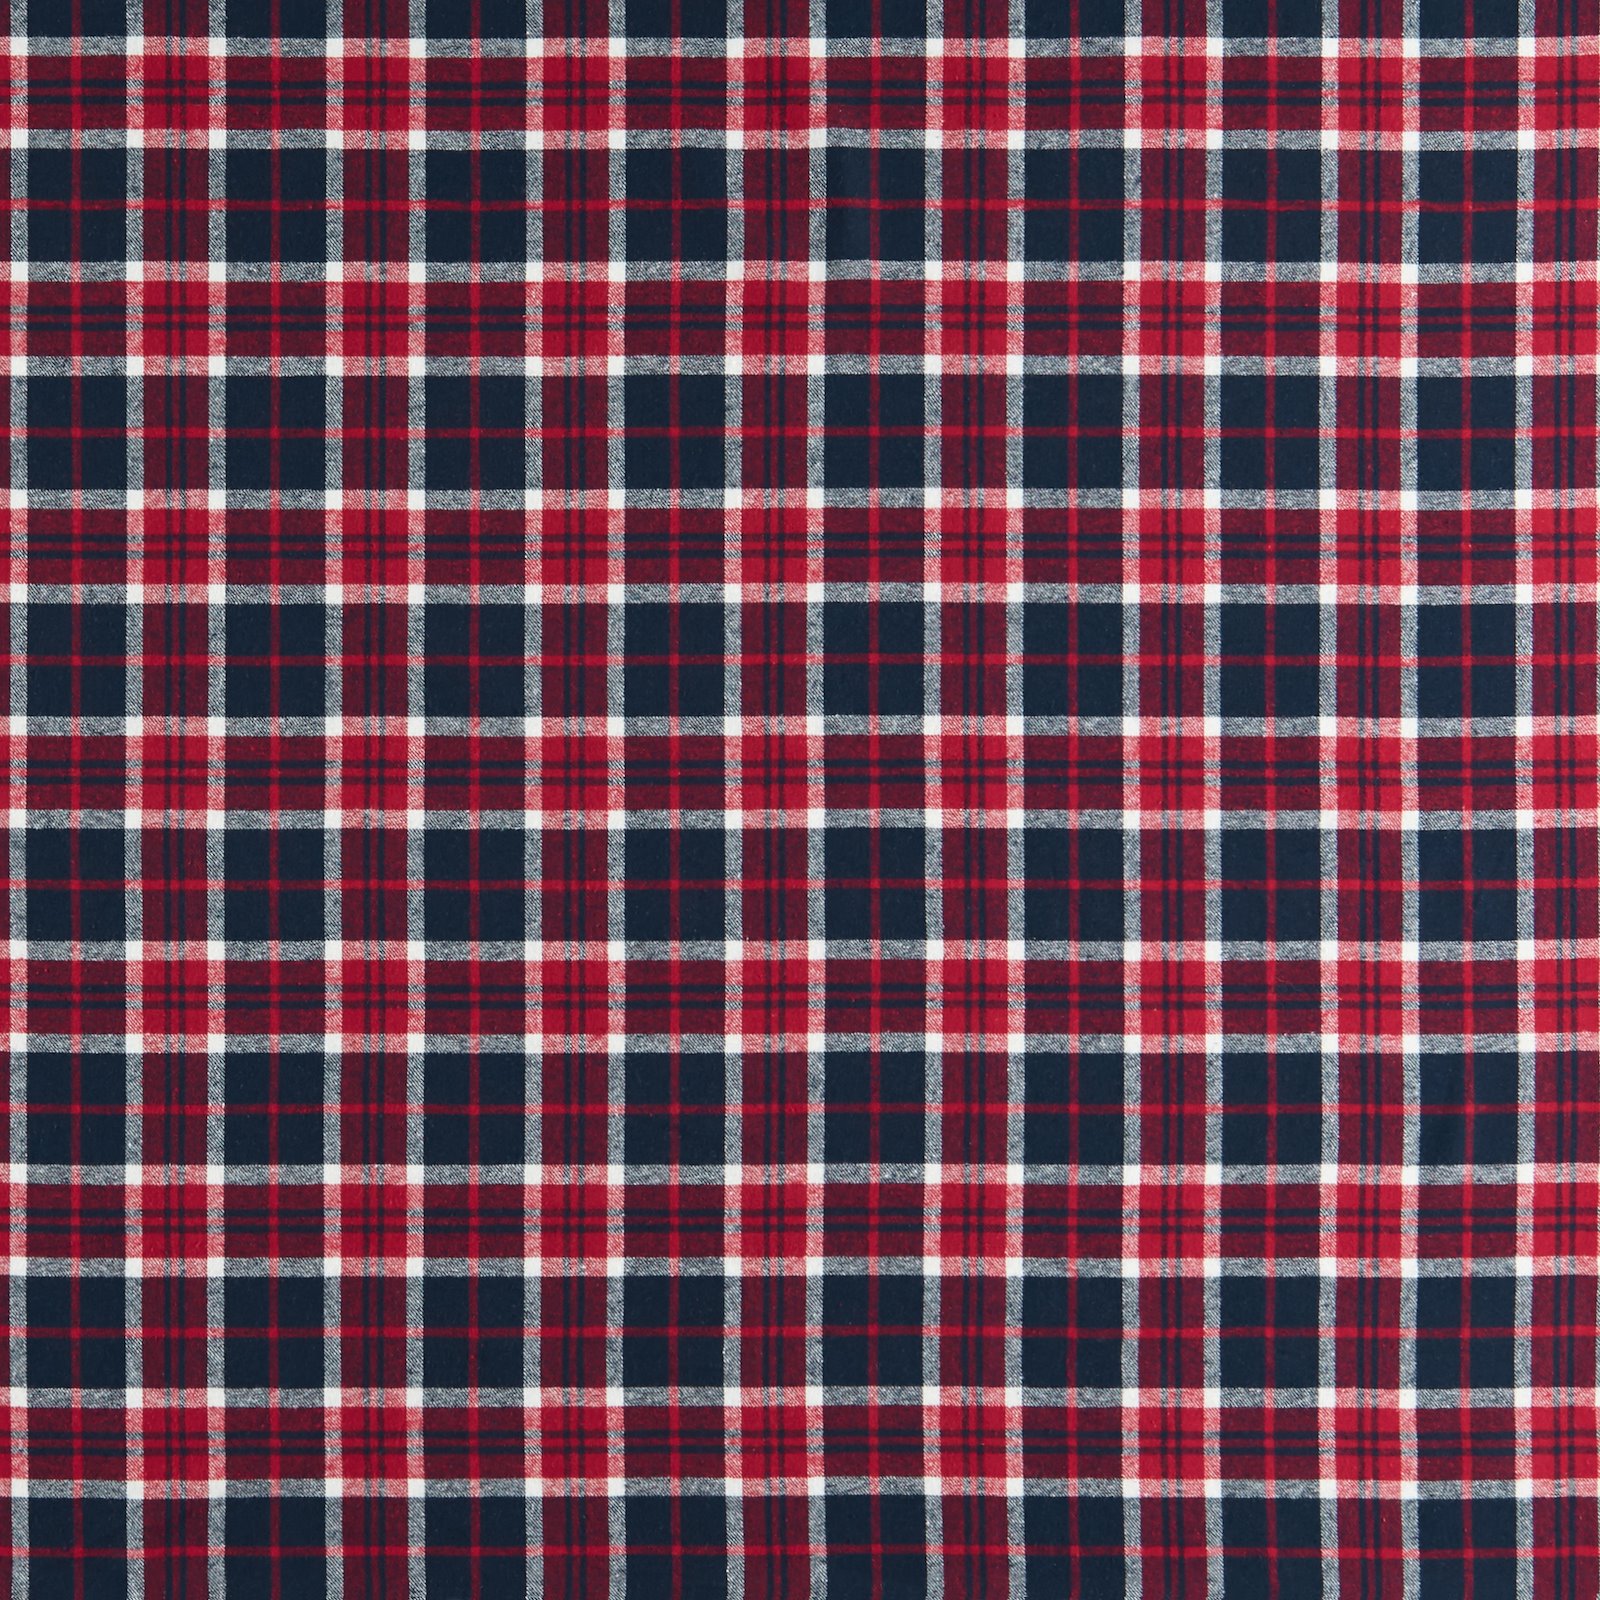 Woven cotton navy/red/white YD check 502047_pack_sp